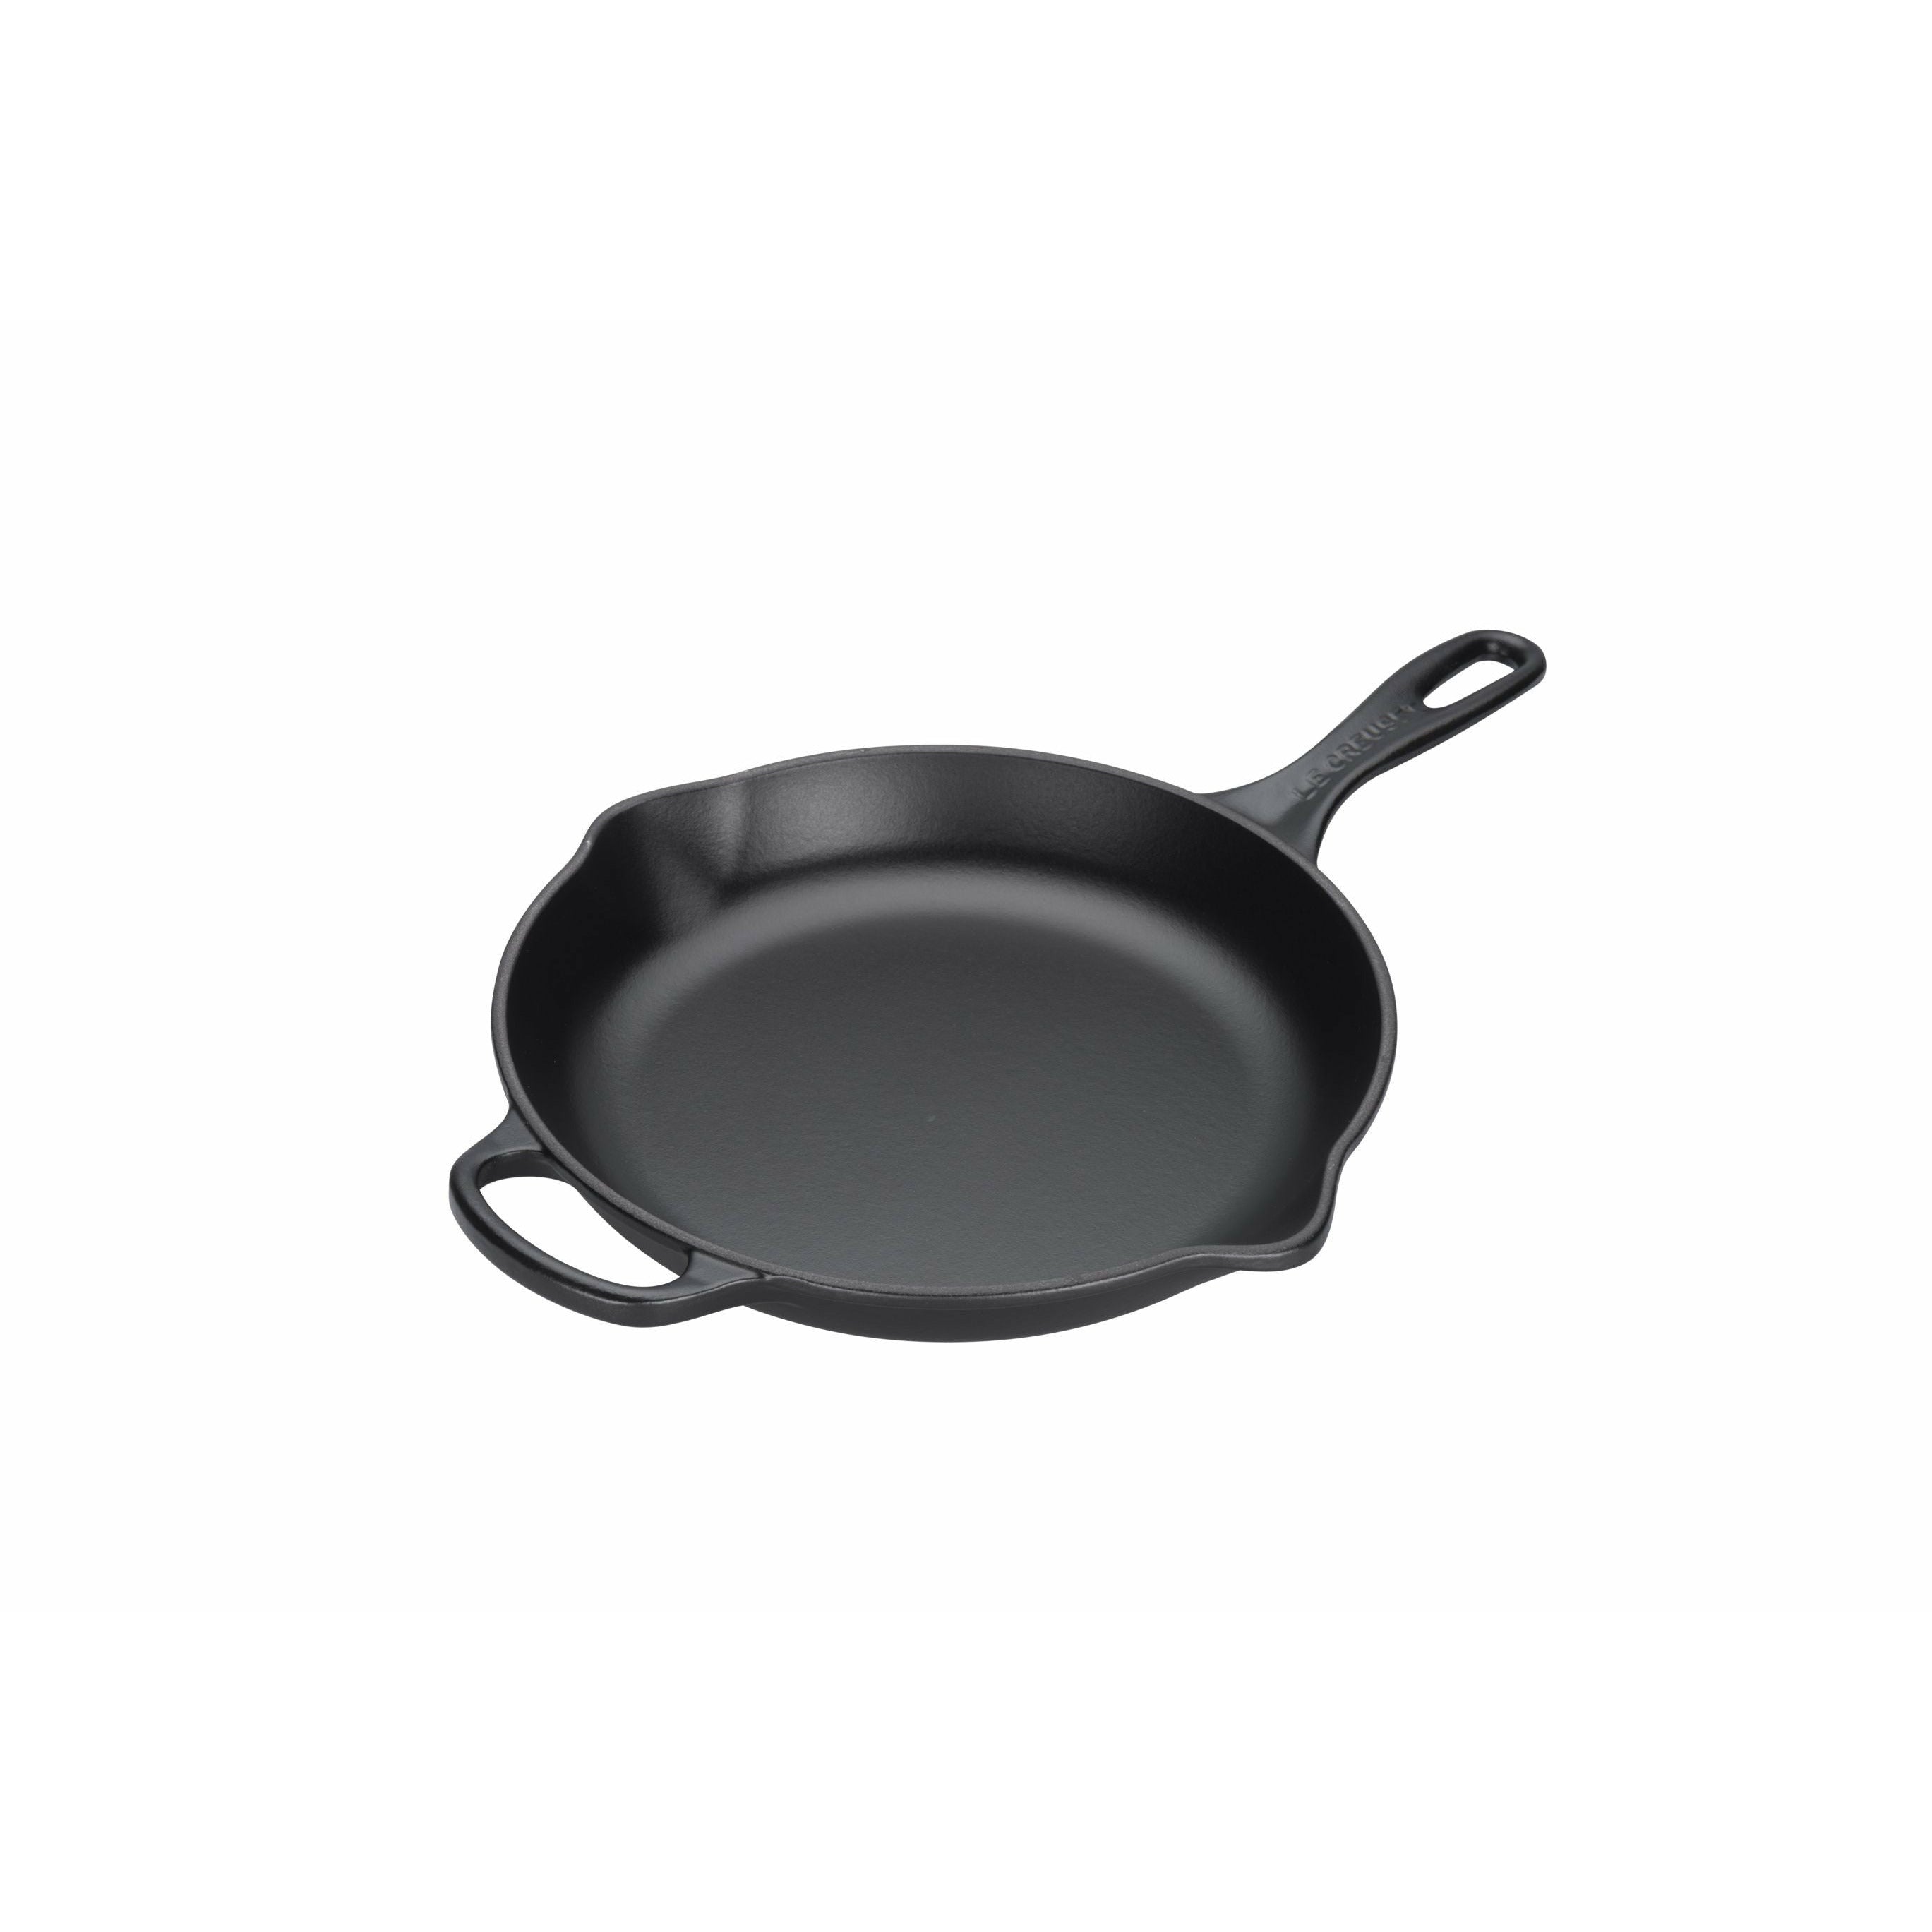 Le Creuset Signature Round Frying And Serving Pan 16 Cm, Black